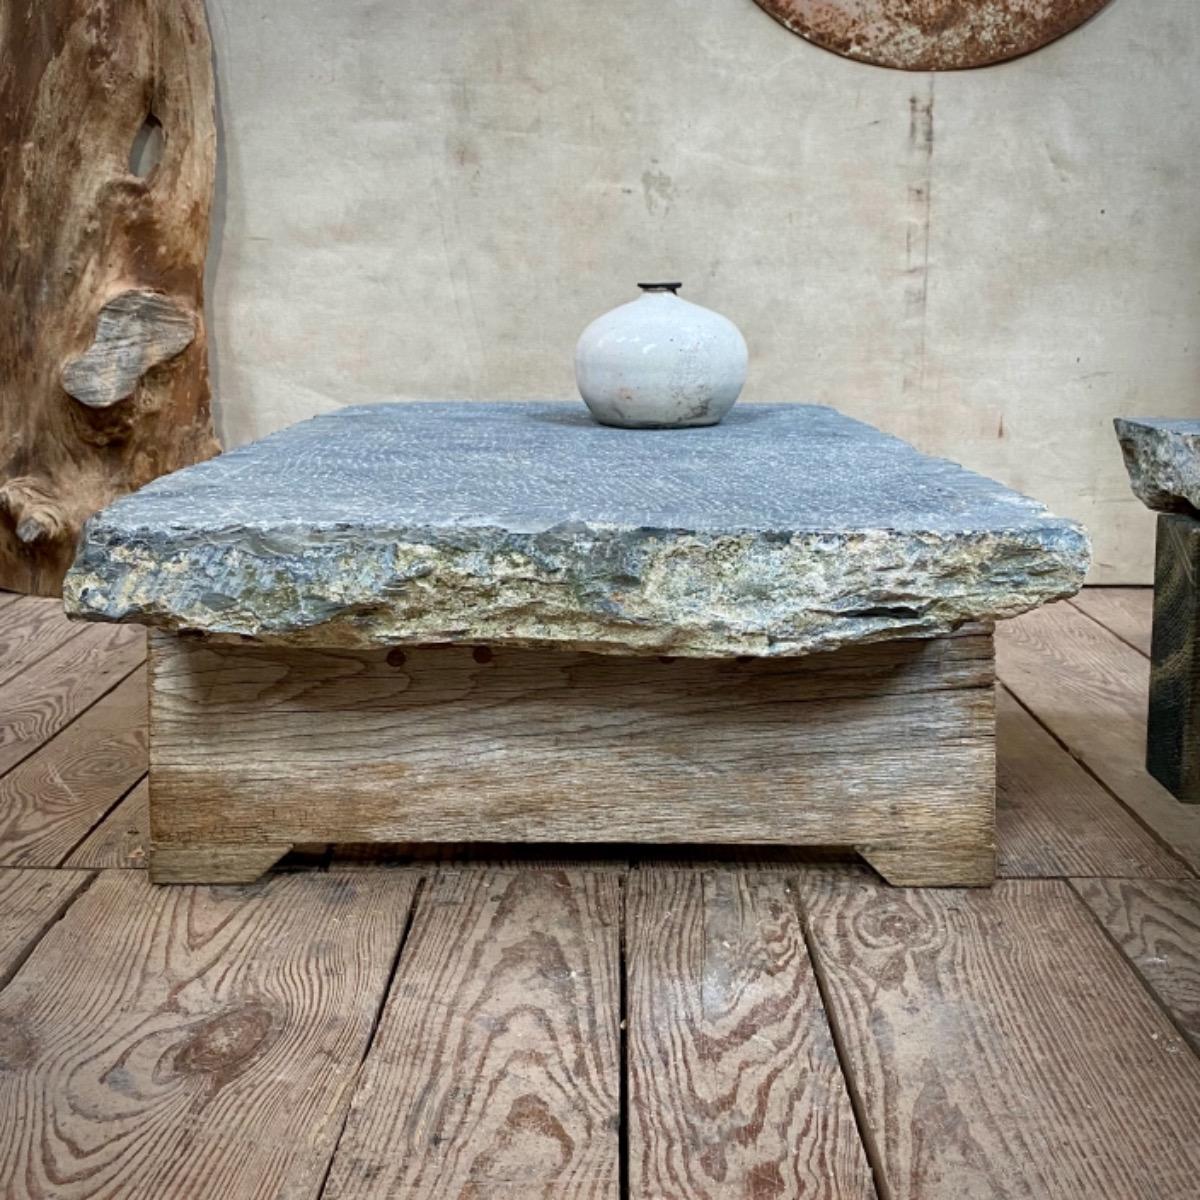 Stone & wood low tables